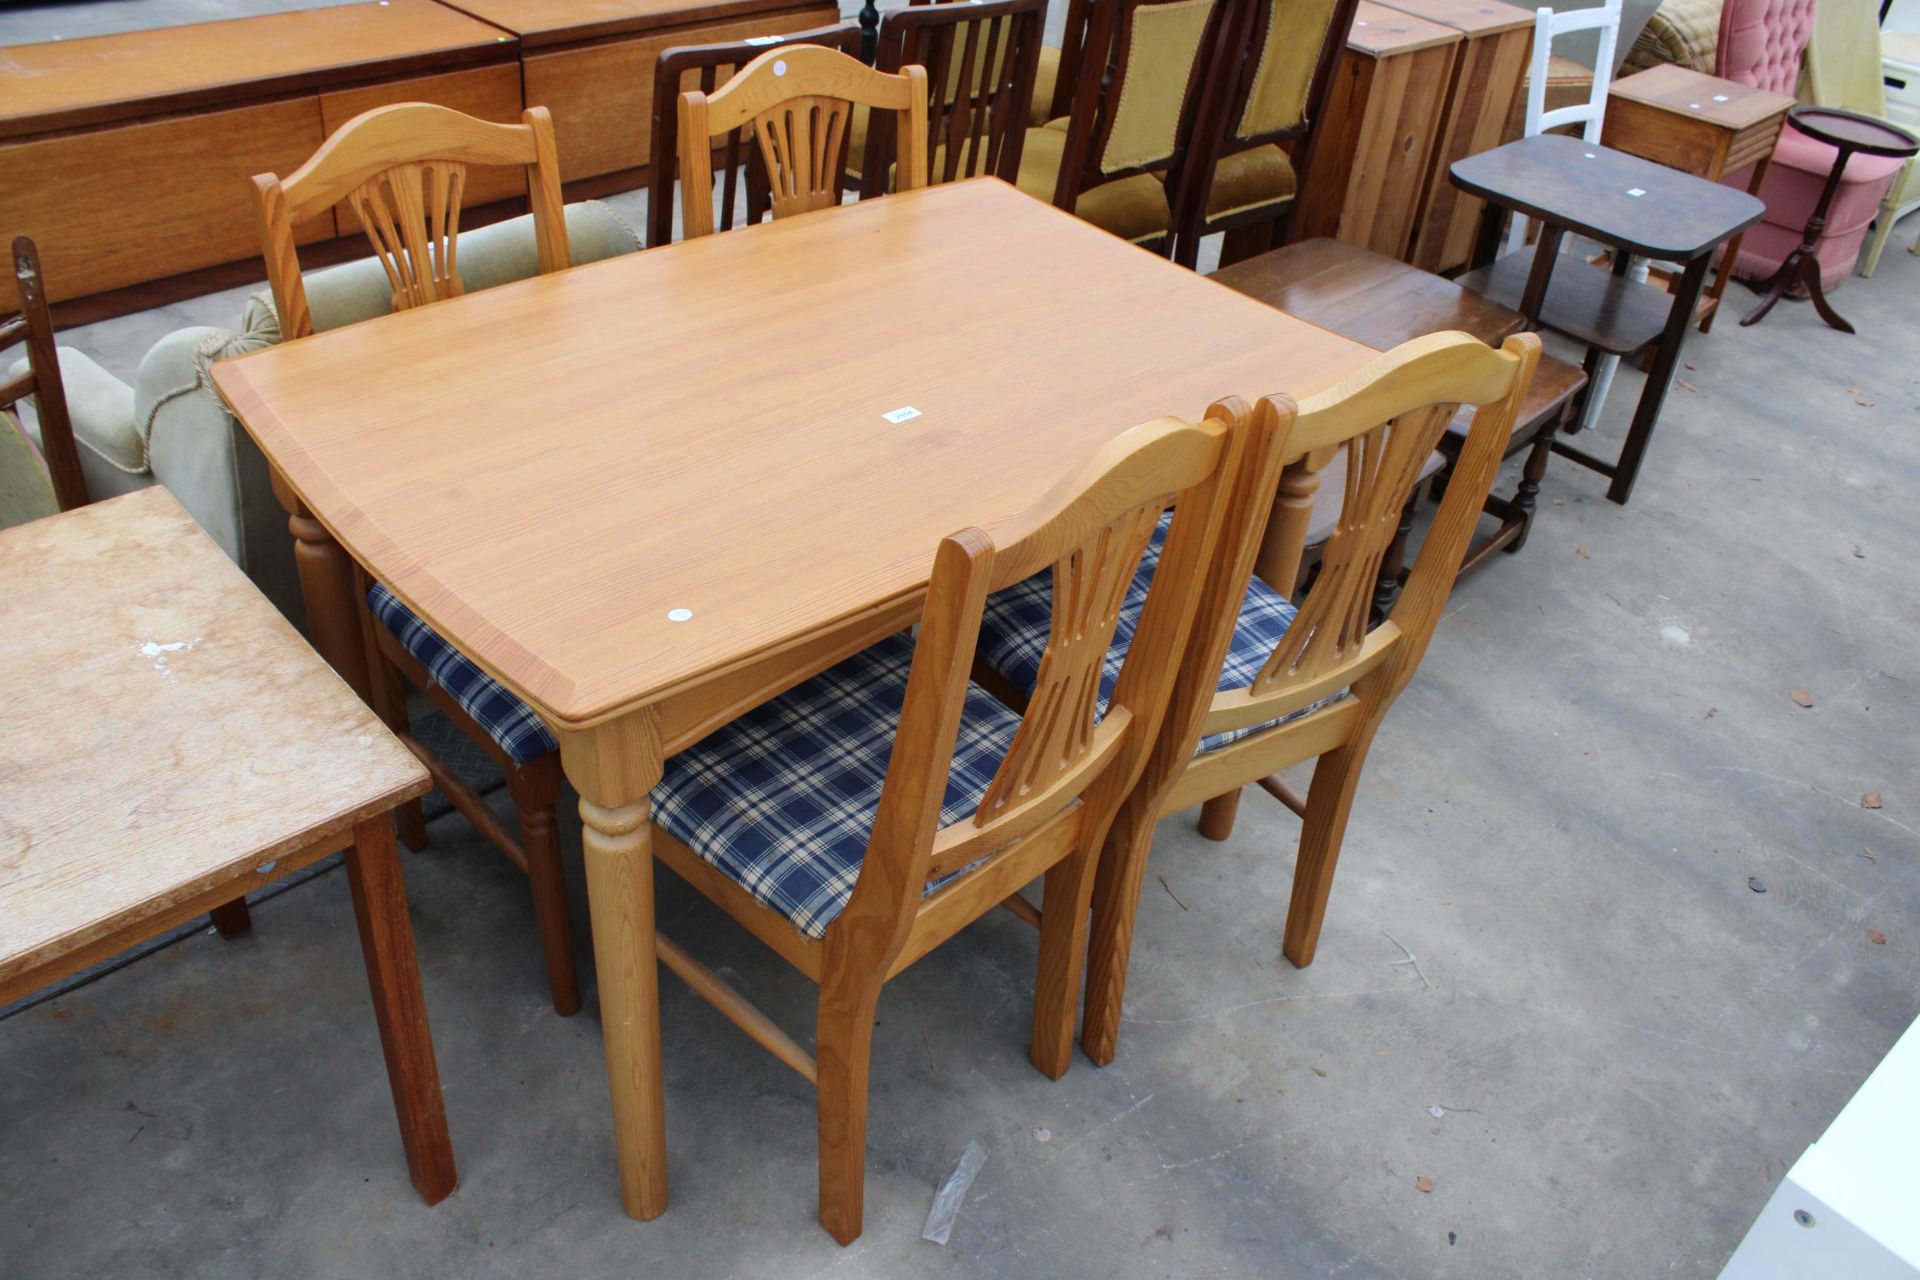 A PINE DINING TABLE 45" X 29" AND FOUR CHAIRS